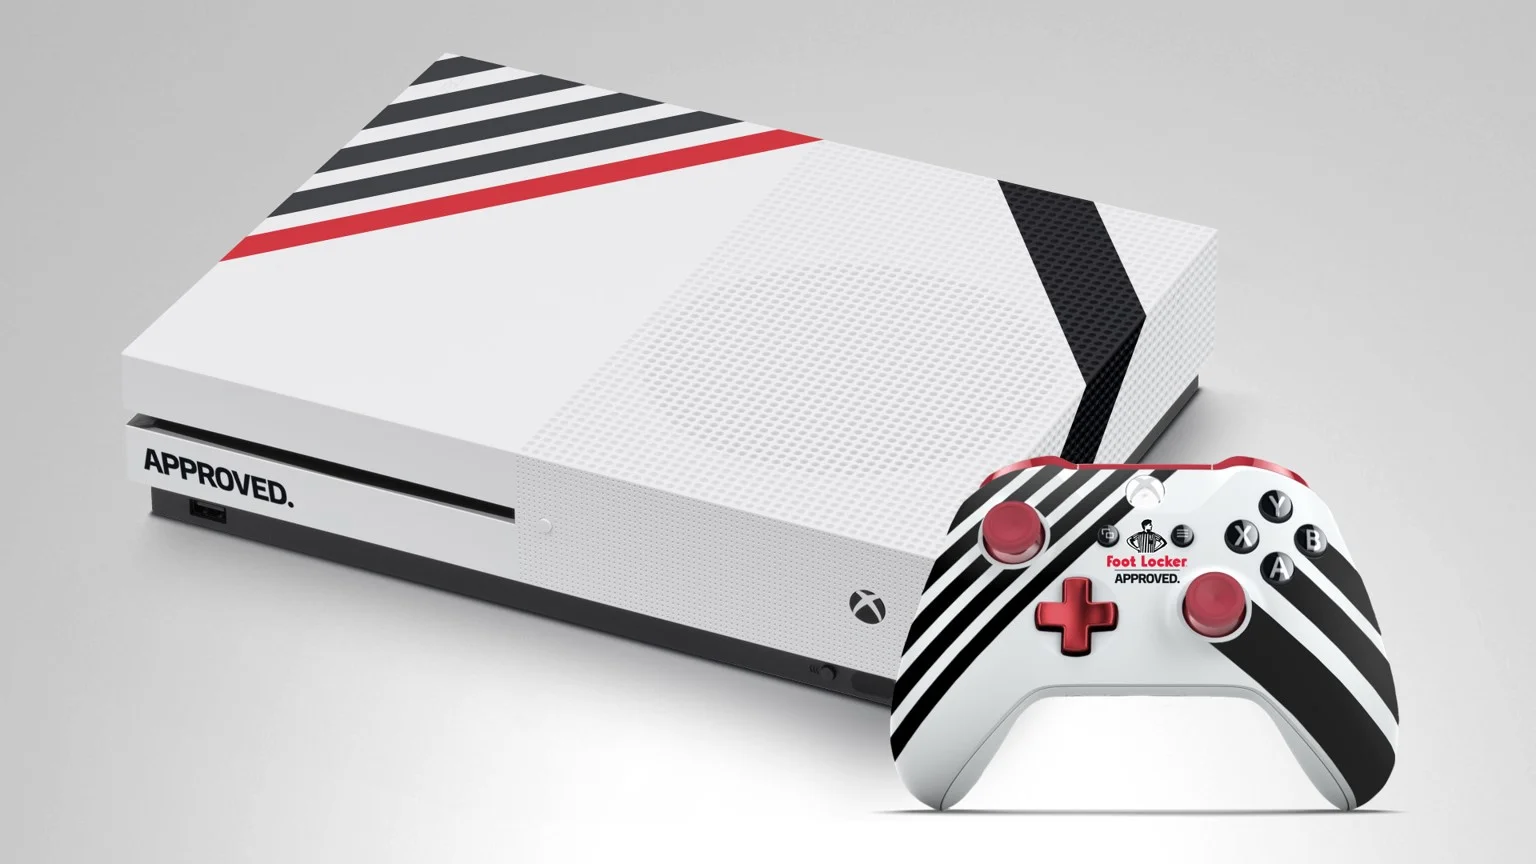 Xbox One S All Digital – New era or just SAD? - Consolevariations